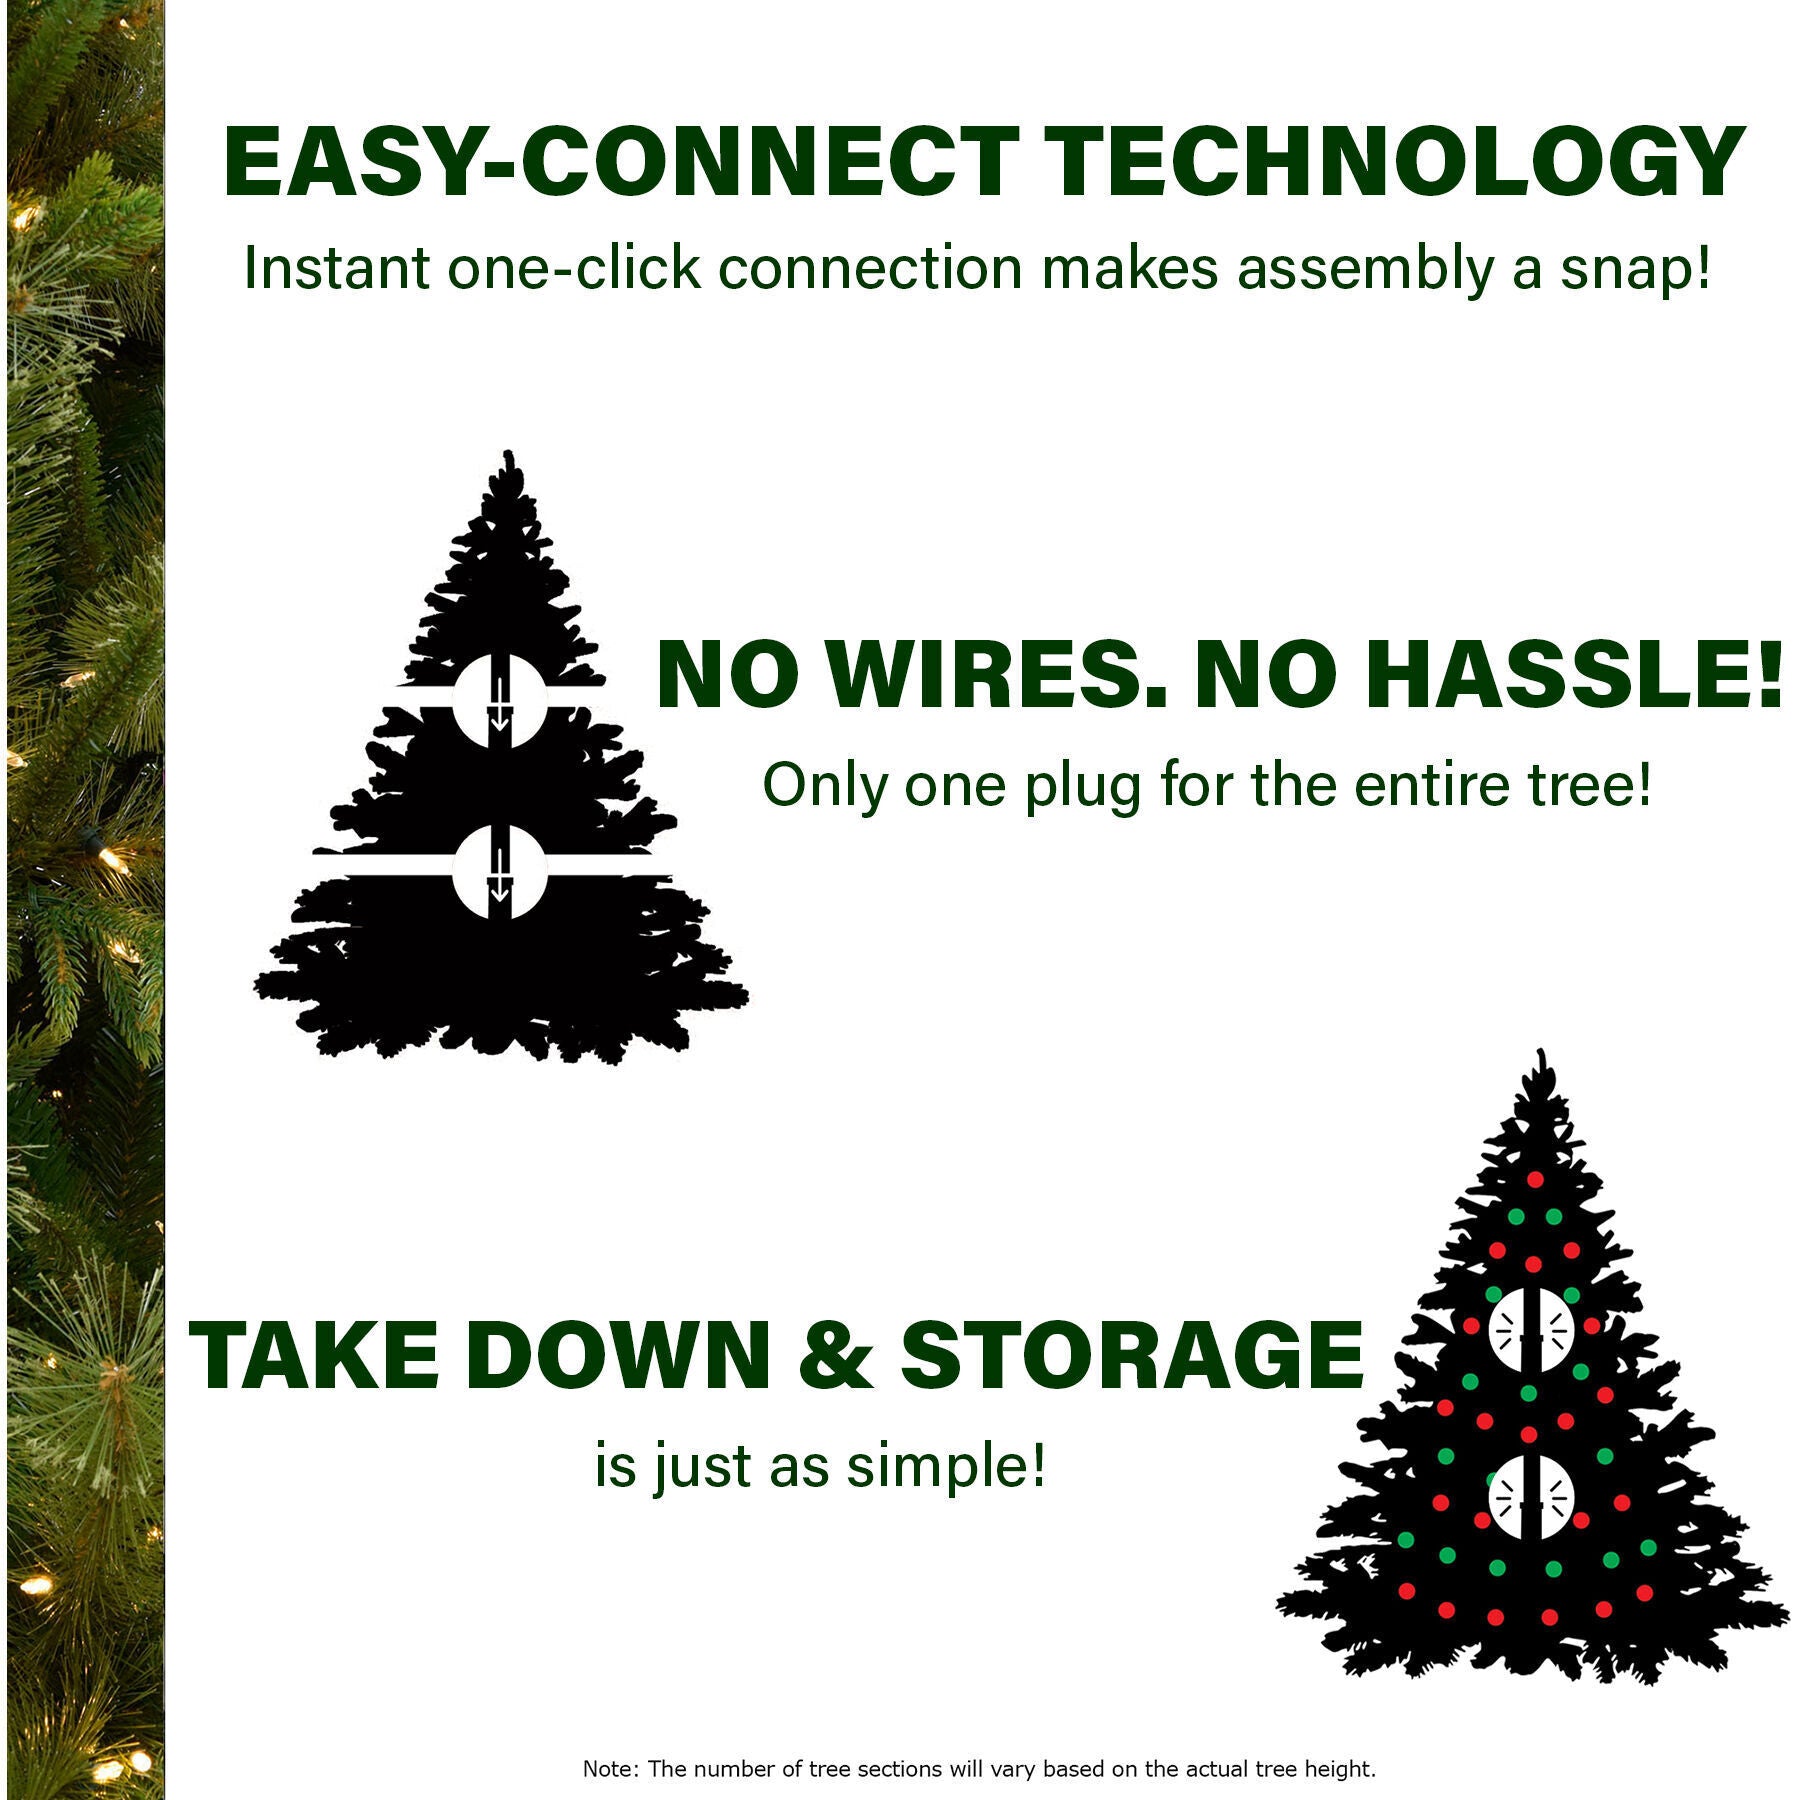 Fraser Hill Farm -  9 Ft. Sugar Hill Snowy Christmas Tree with Pinecones and Multi-Color LED Lighting